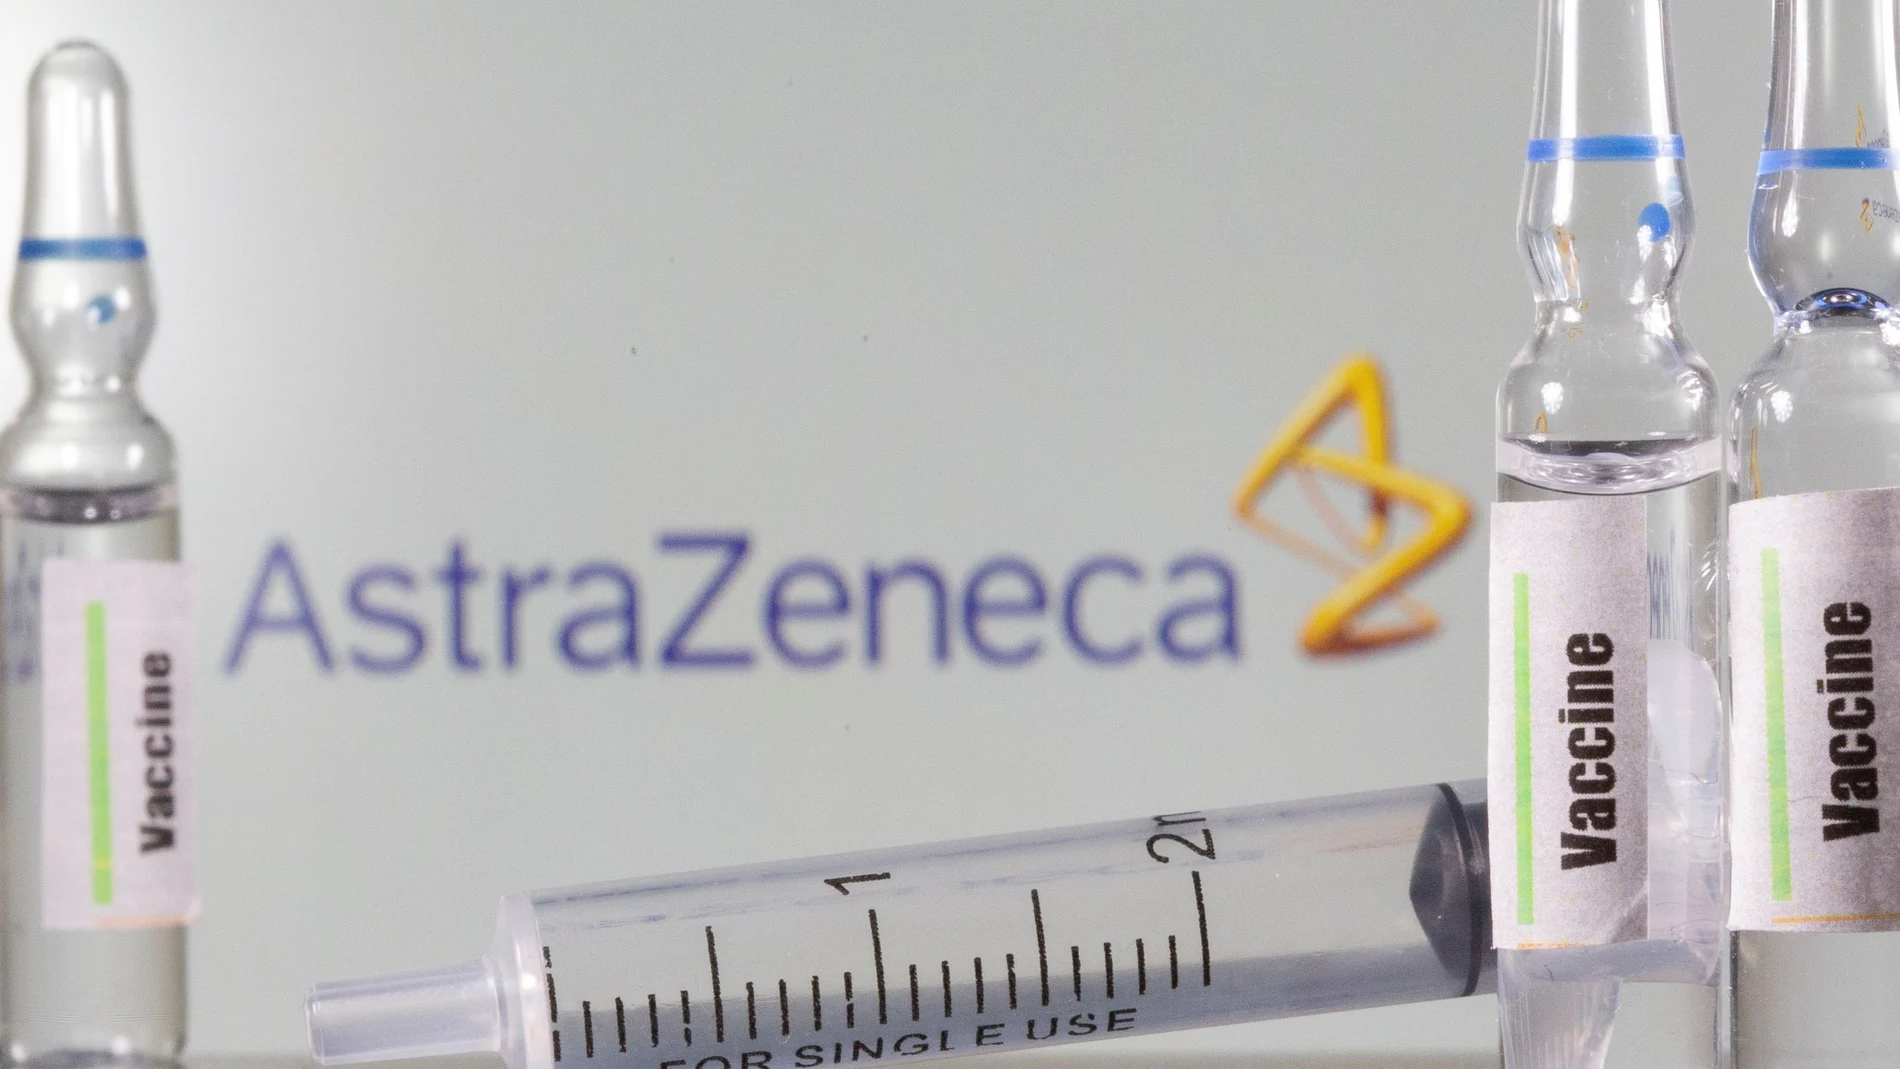 A test tube labelled with the Vaccine is seen in front of AstraZeneca logo in this illustration taken